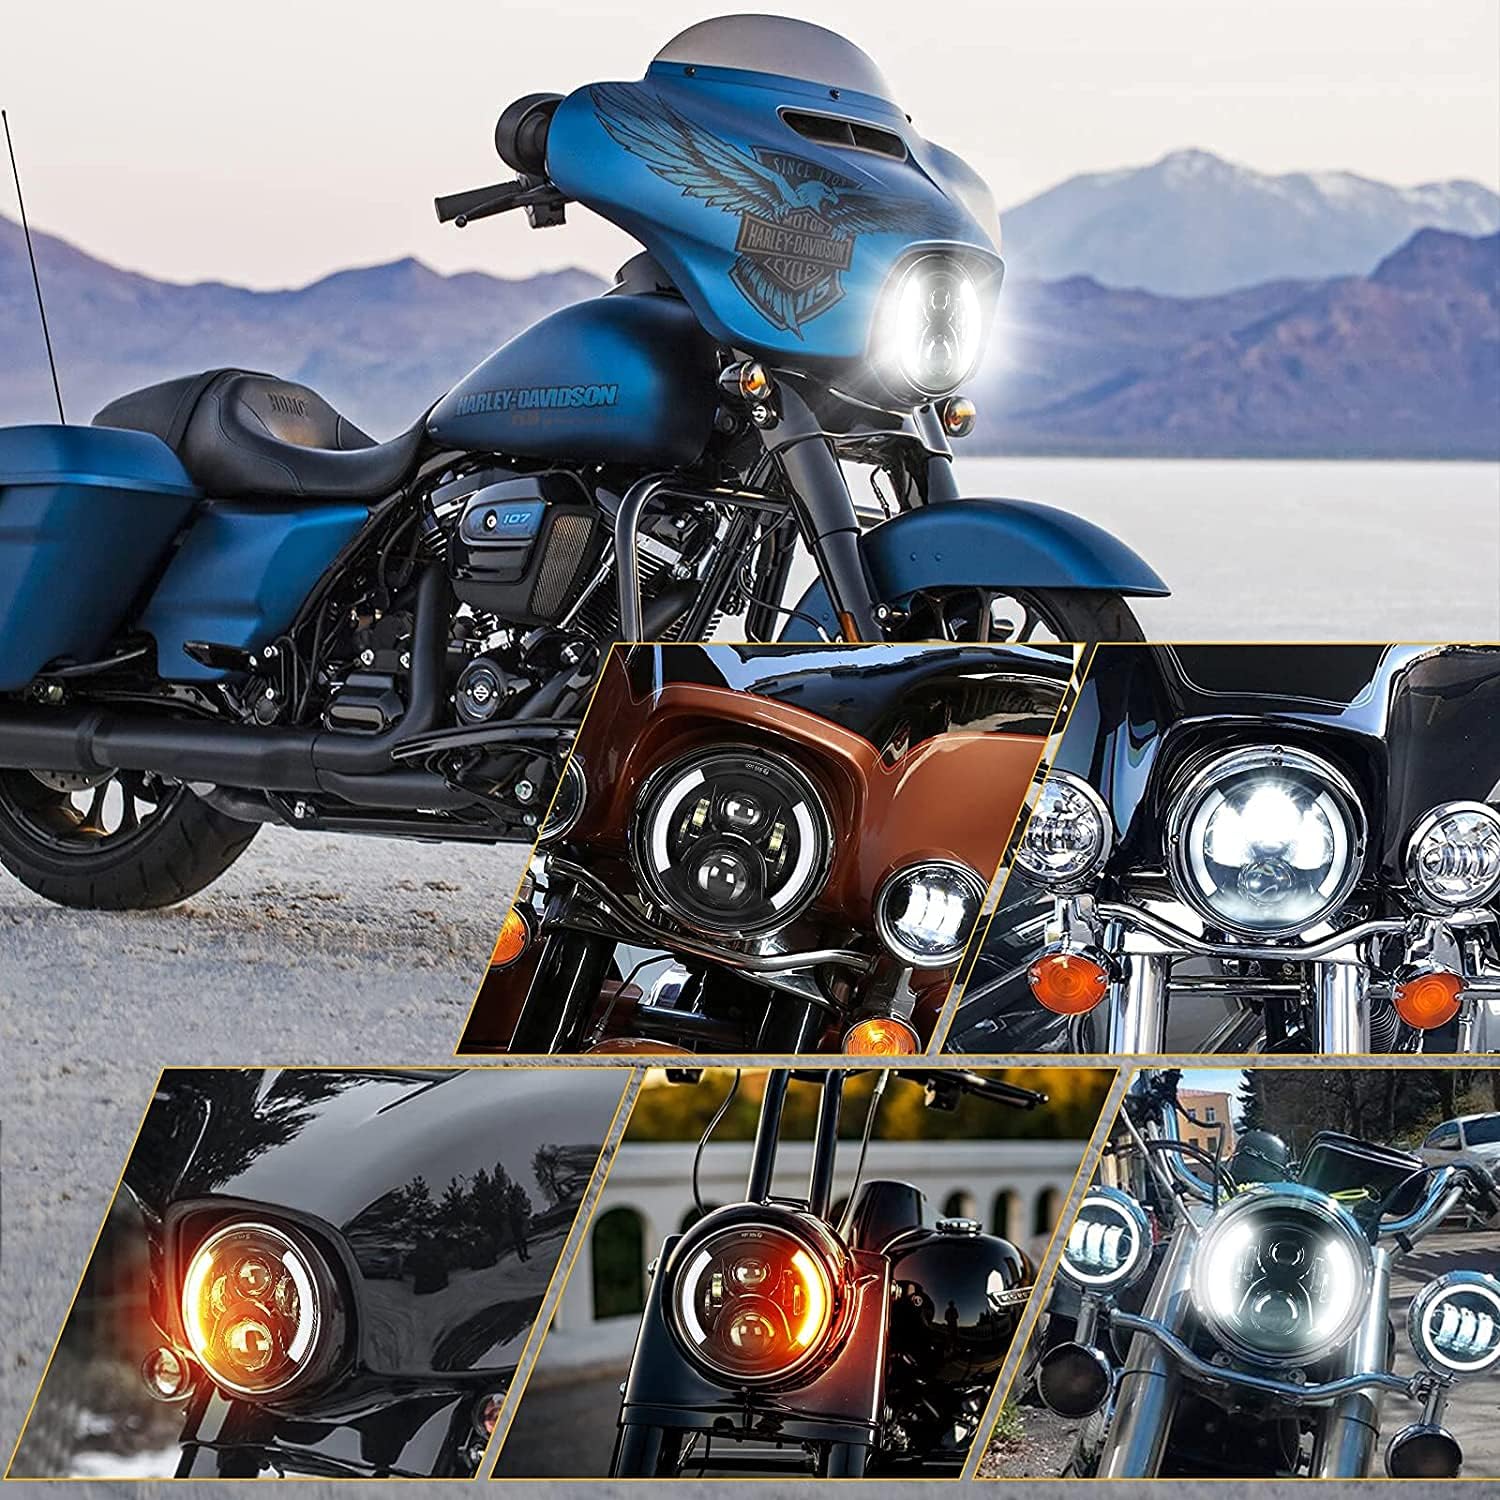 SUPAREE SUPAREE 7 inch LED Motorcycle Headlight with 4.5 inch Fog Light Product description